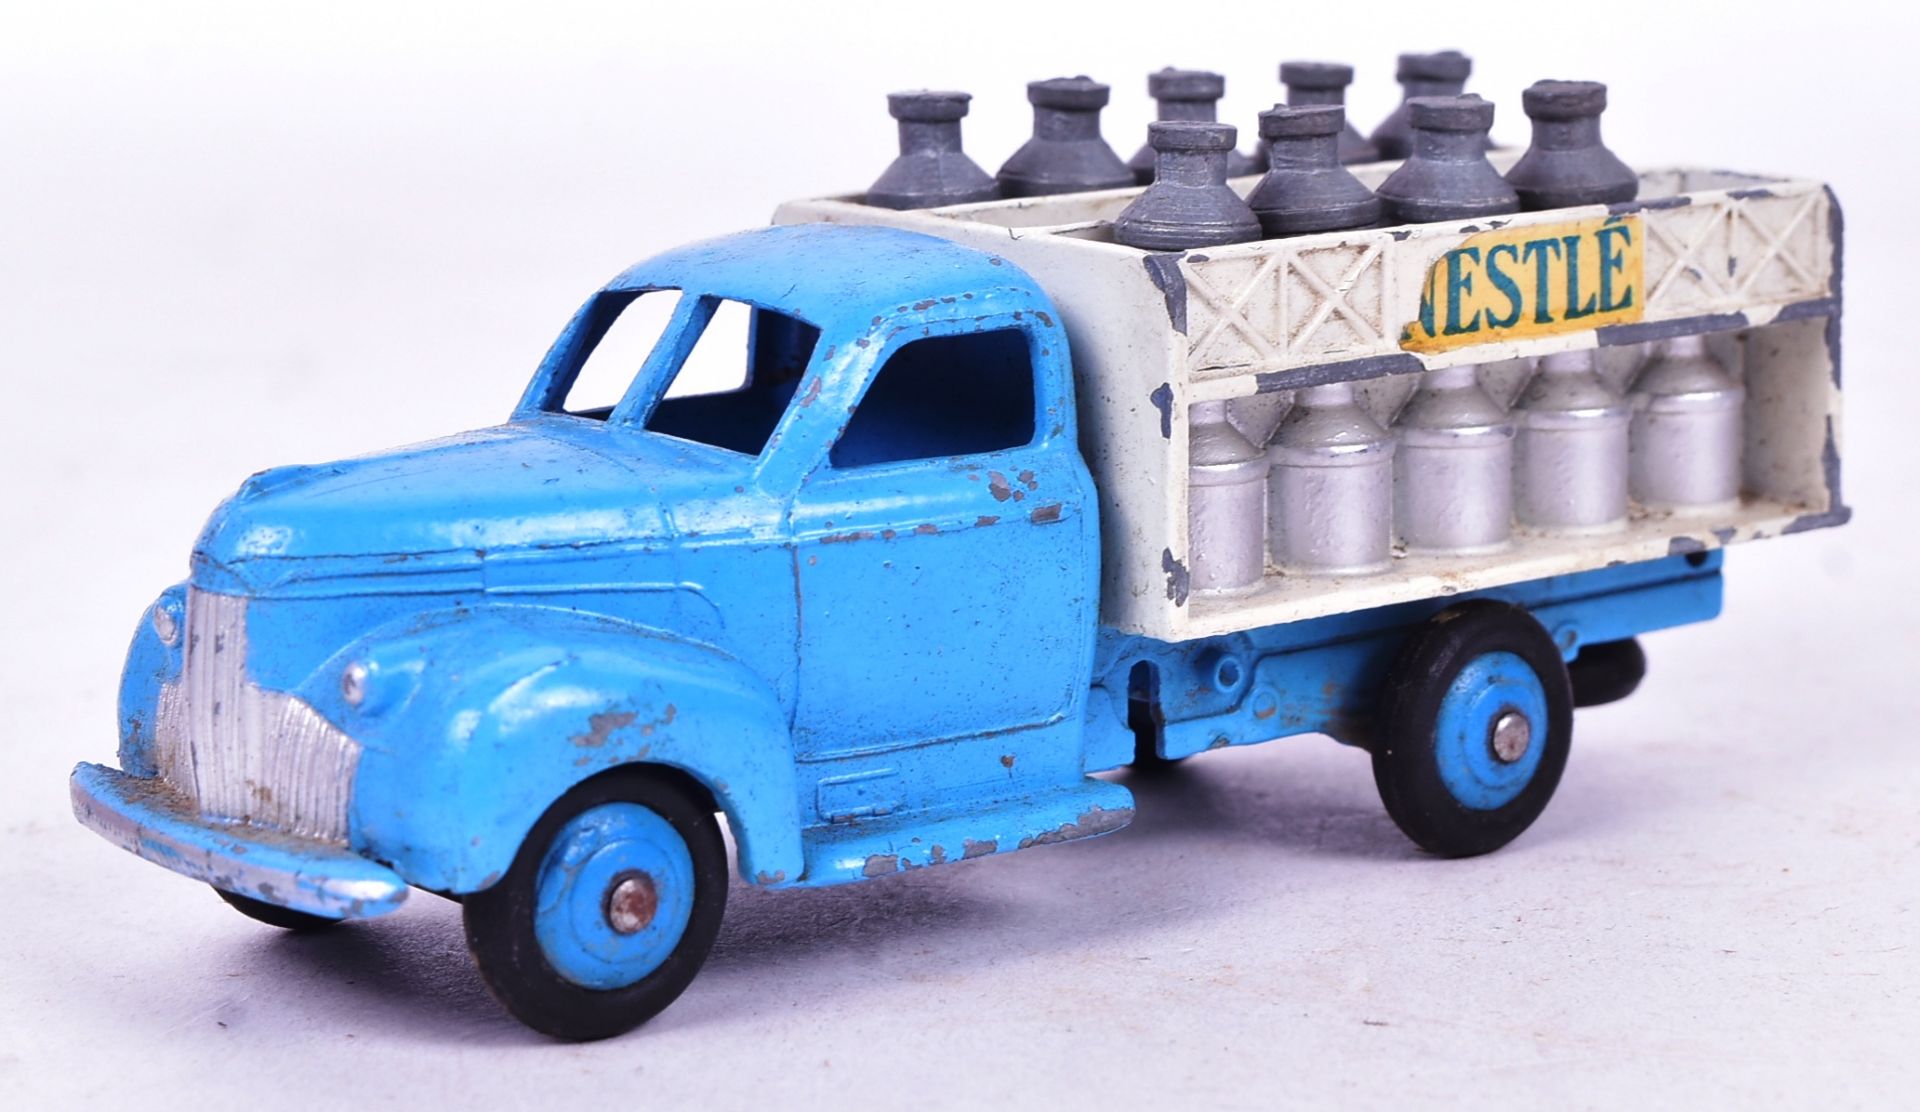 DIECAST - FRENCH DINKY TOYS - NESTLE DAIRY TRUCK - Image 2 of 6